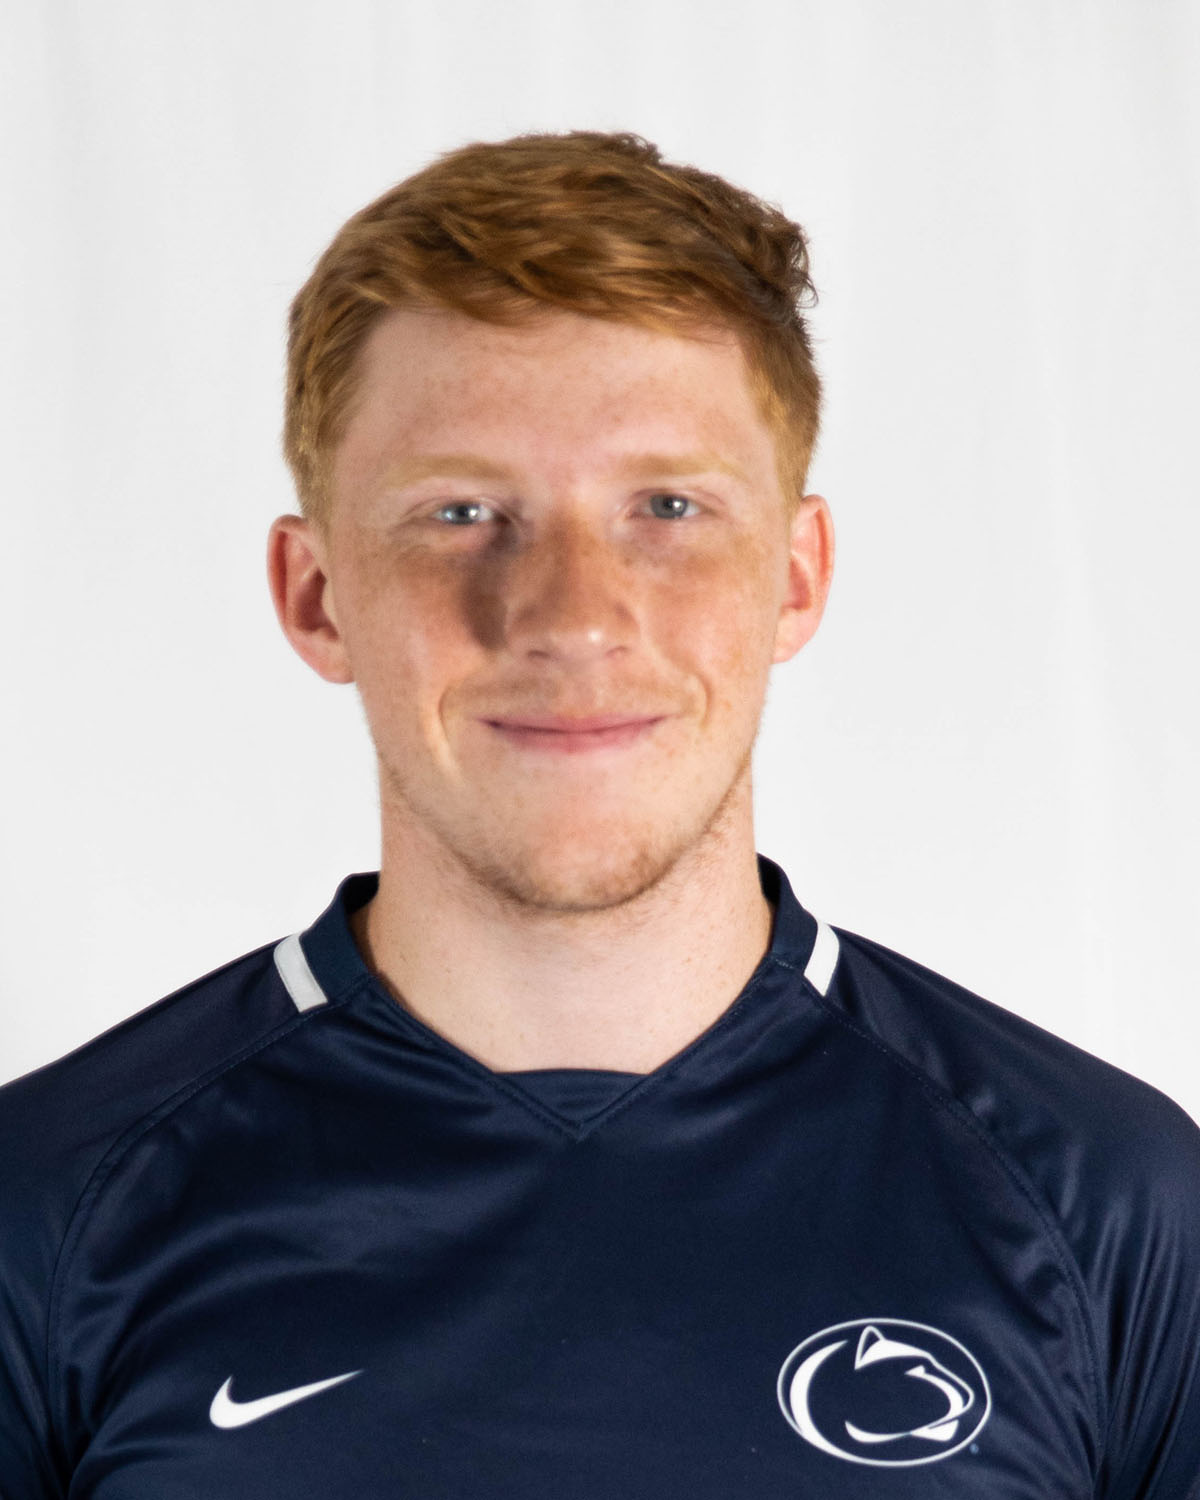 PSUAC Player of the Week (October 18th, 2022)